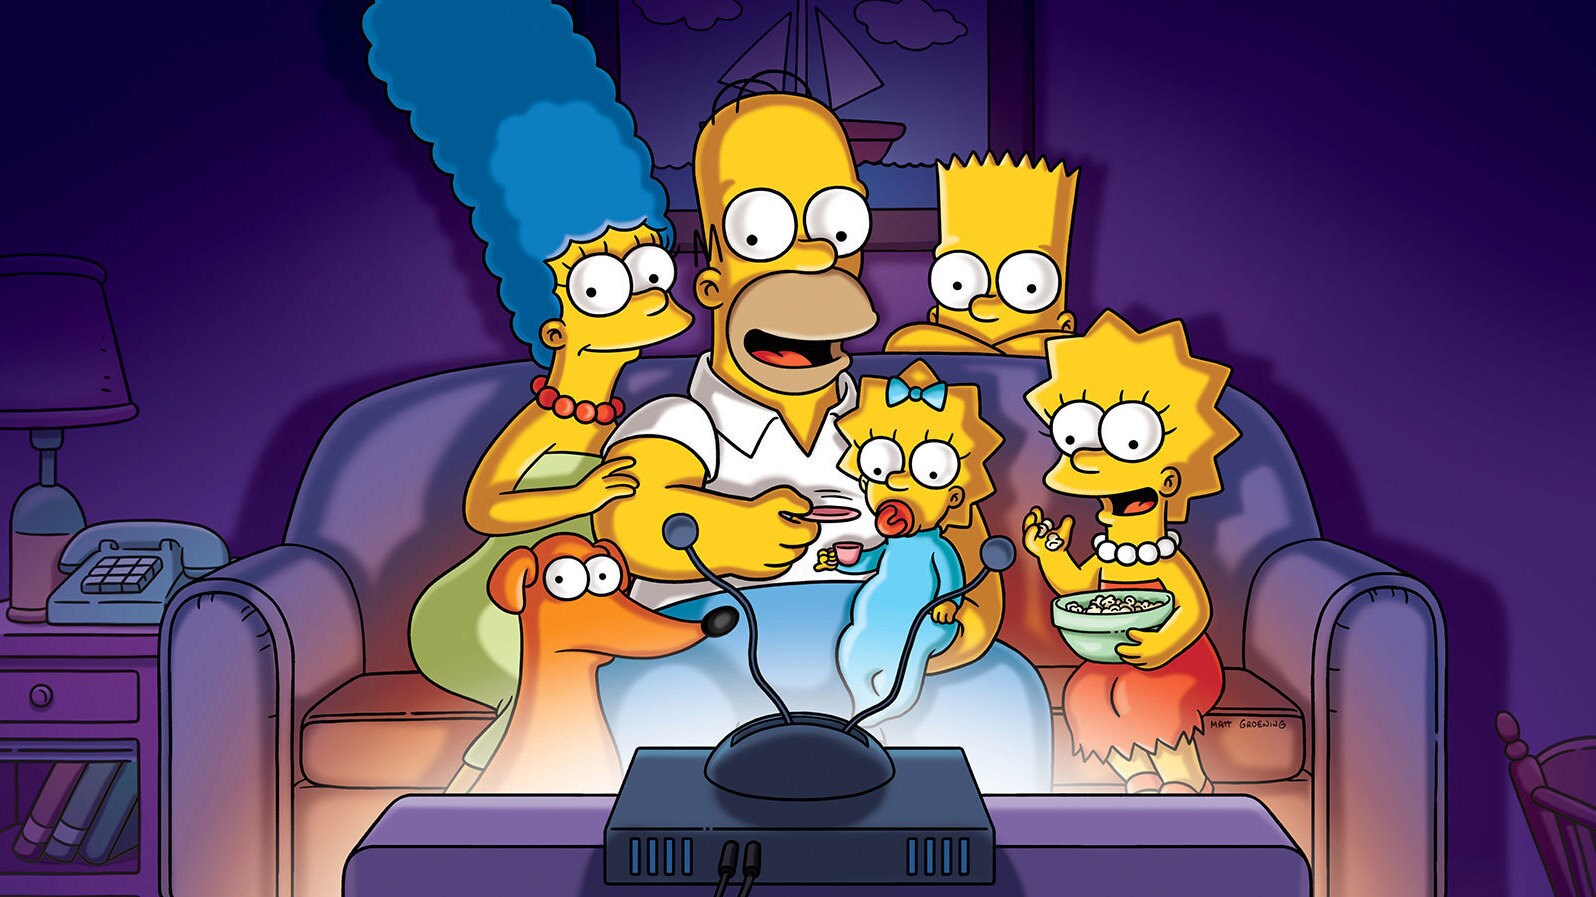 It’s Official: The Simpsons Are Coming to Disney+ on November 12